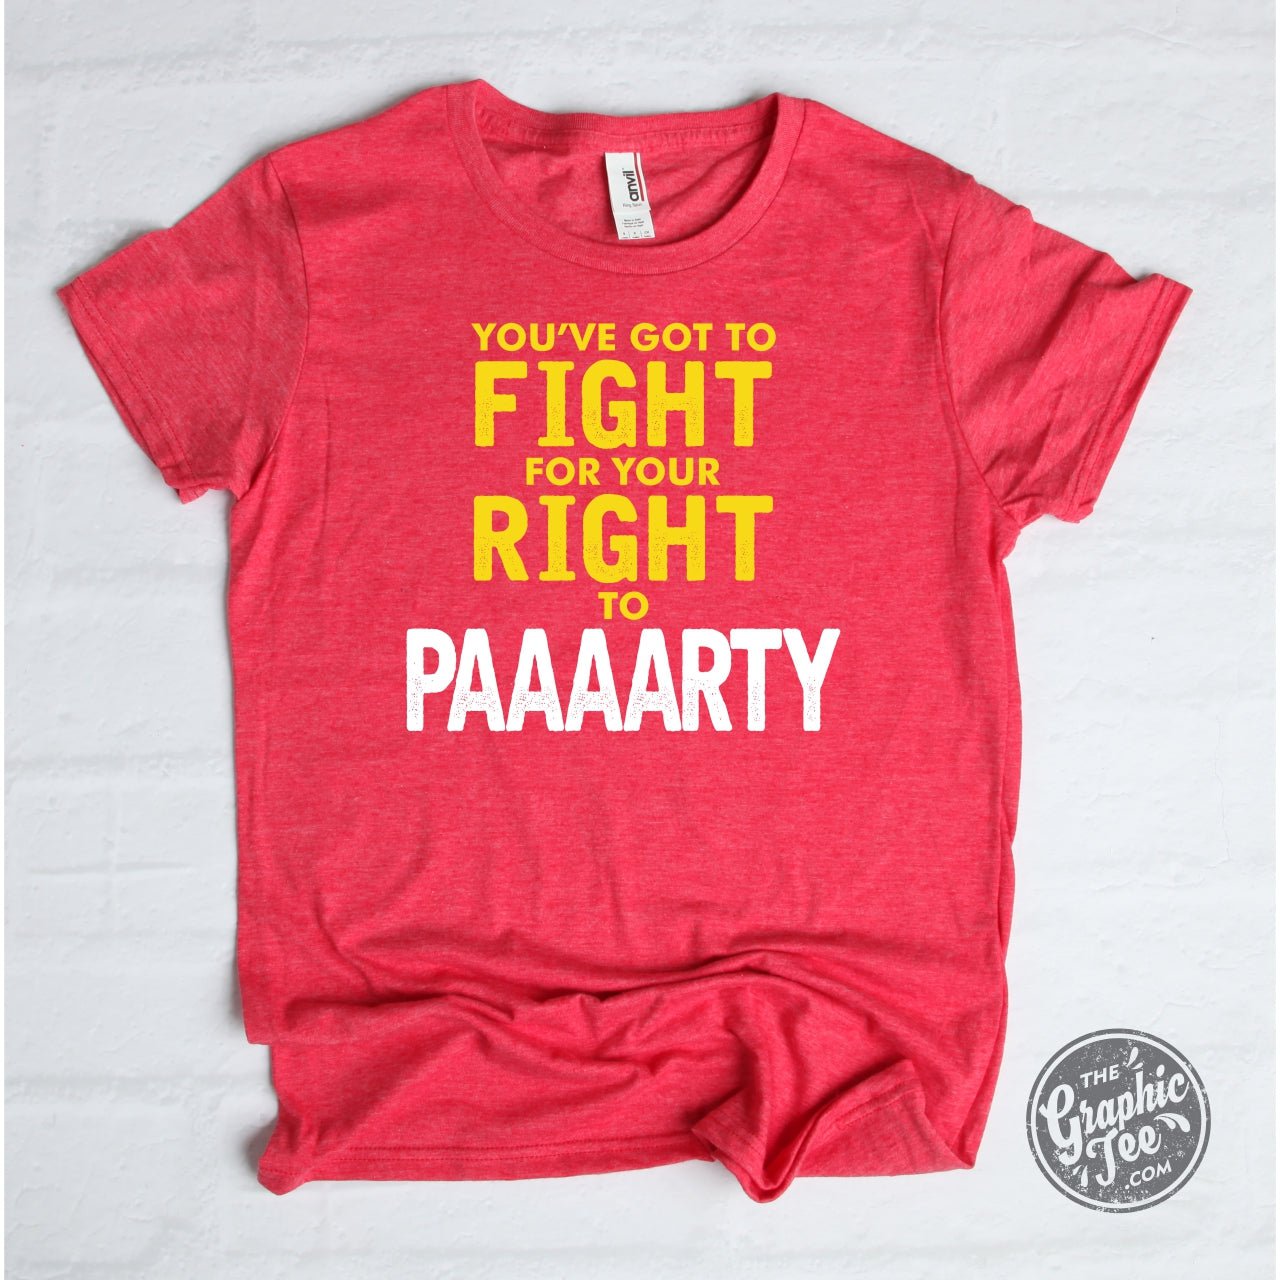 You've Got to Fight For Your Right To PAAARTY Red Short Sleeve Tee - The Graphic Tee